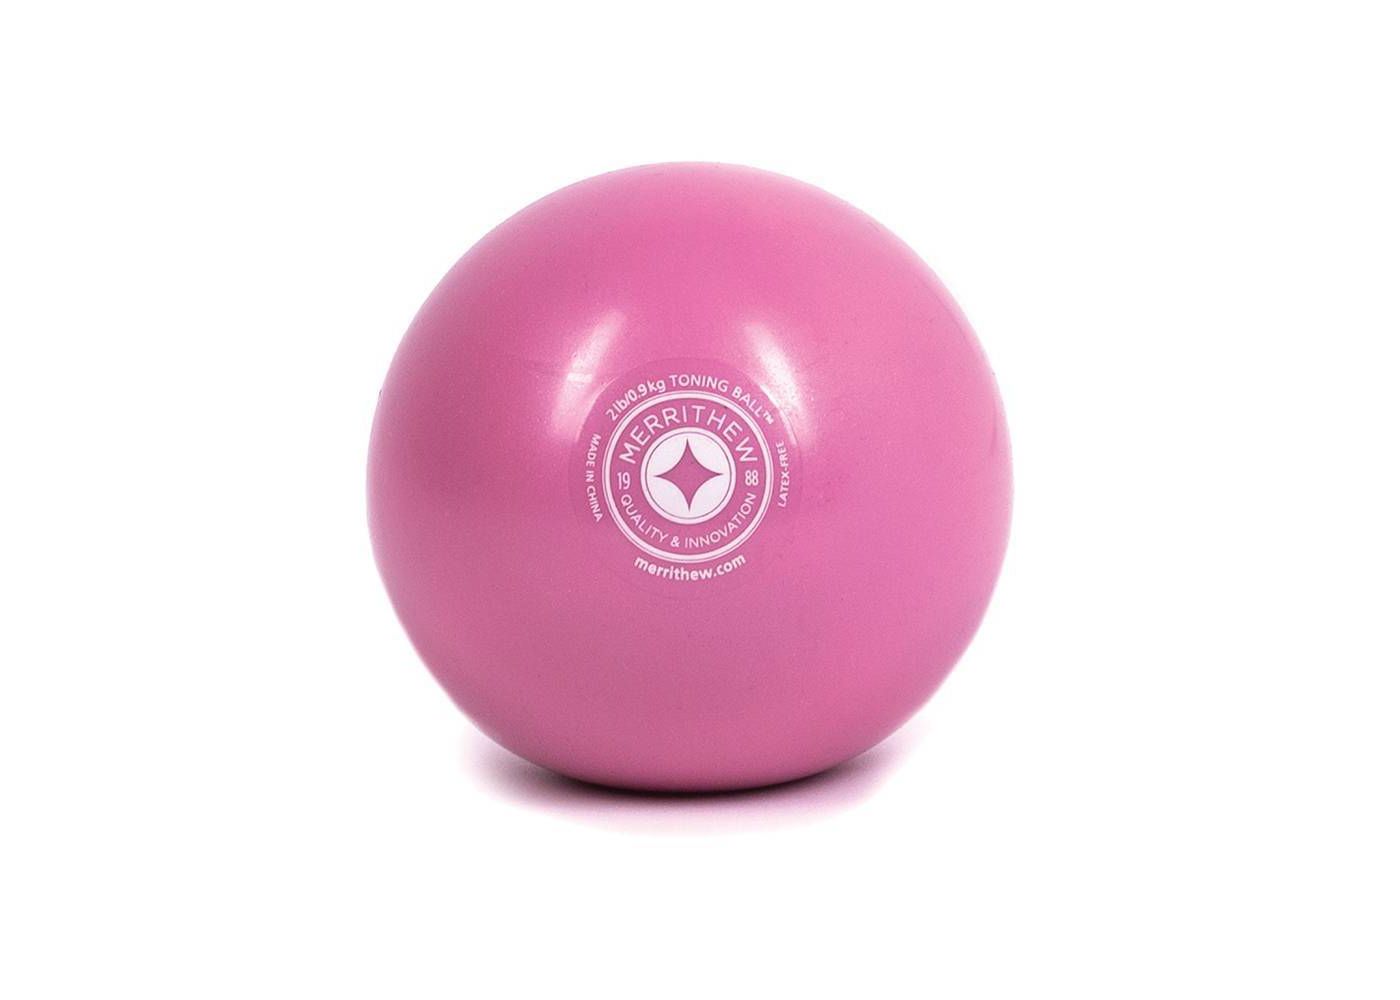 A Pilates ball from Target used as an alternative and substitute to purchasing a Pure Barre 5-inch ball and the Pure Barre 5 exercise ball